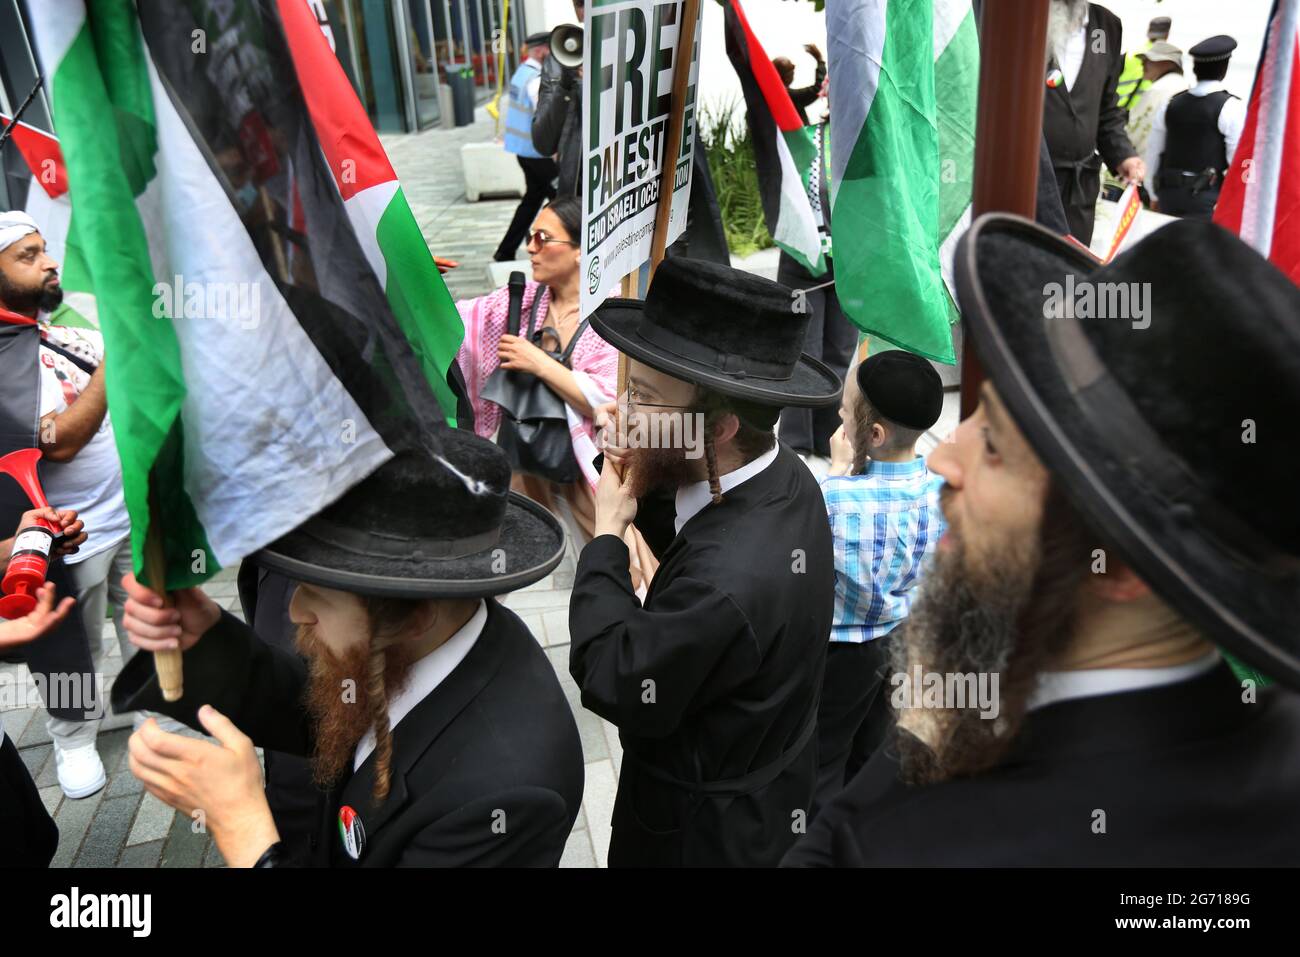 London, UK. 09th July, 2021. Protesters from the orthodox Jewish anti-Zionist group the Neturei Karta hold Palestinian flags and placards during a protest outside the London School of Economics.Students and other protesters go on a tour of London Universities to demand a boycott for all Israeli academic and cultural institutions in solidarity with the struggle to end Israel's occupation, colonisation and system of apartheid in Israel. Credit: SOPA Images Limited/Alamy Live News Stock Photo